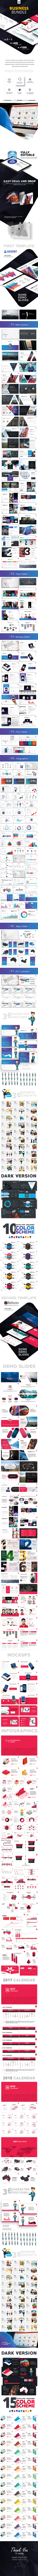 Business Bundle 2 in 1 PowerPoint Template